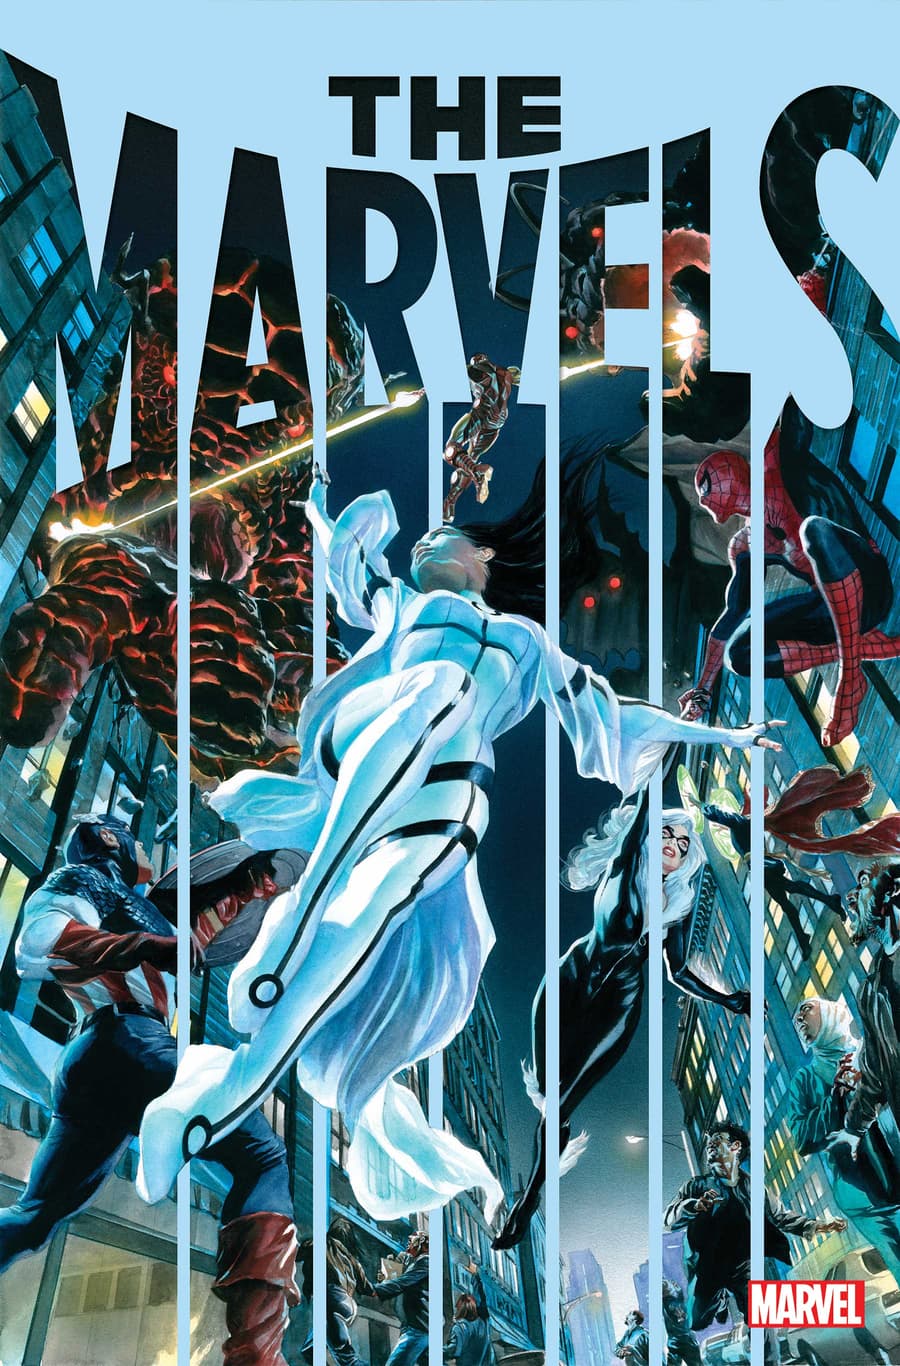 THE MARVELS #4 cover by Alex Ross